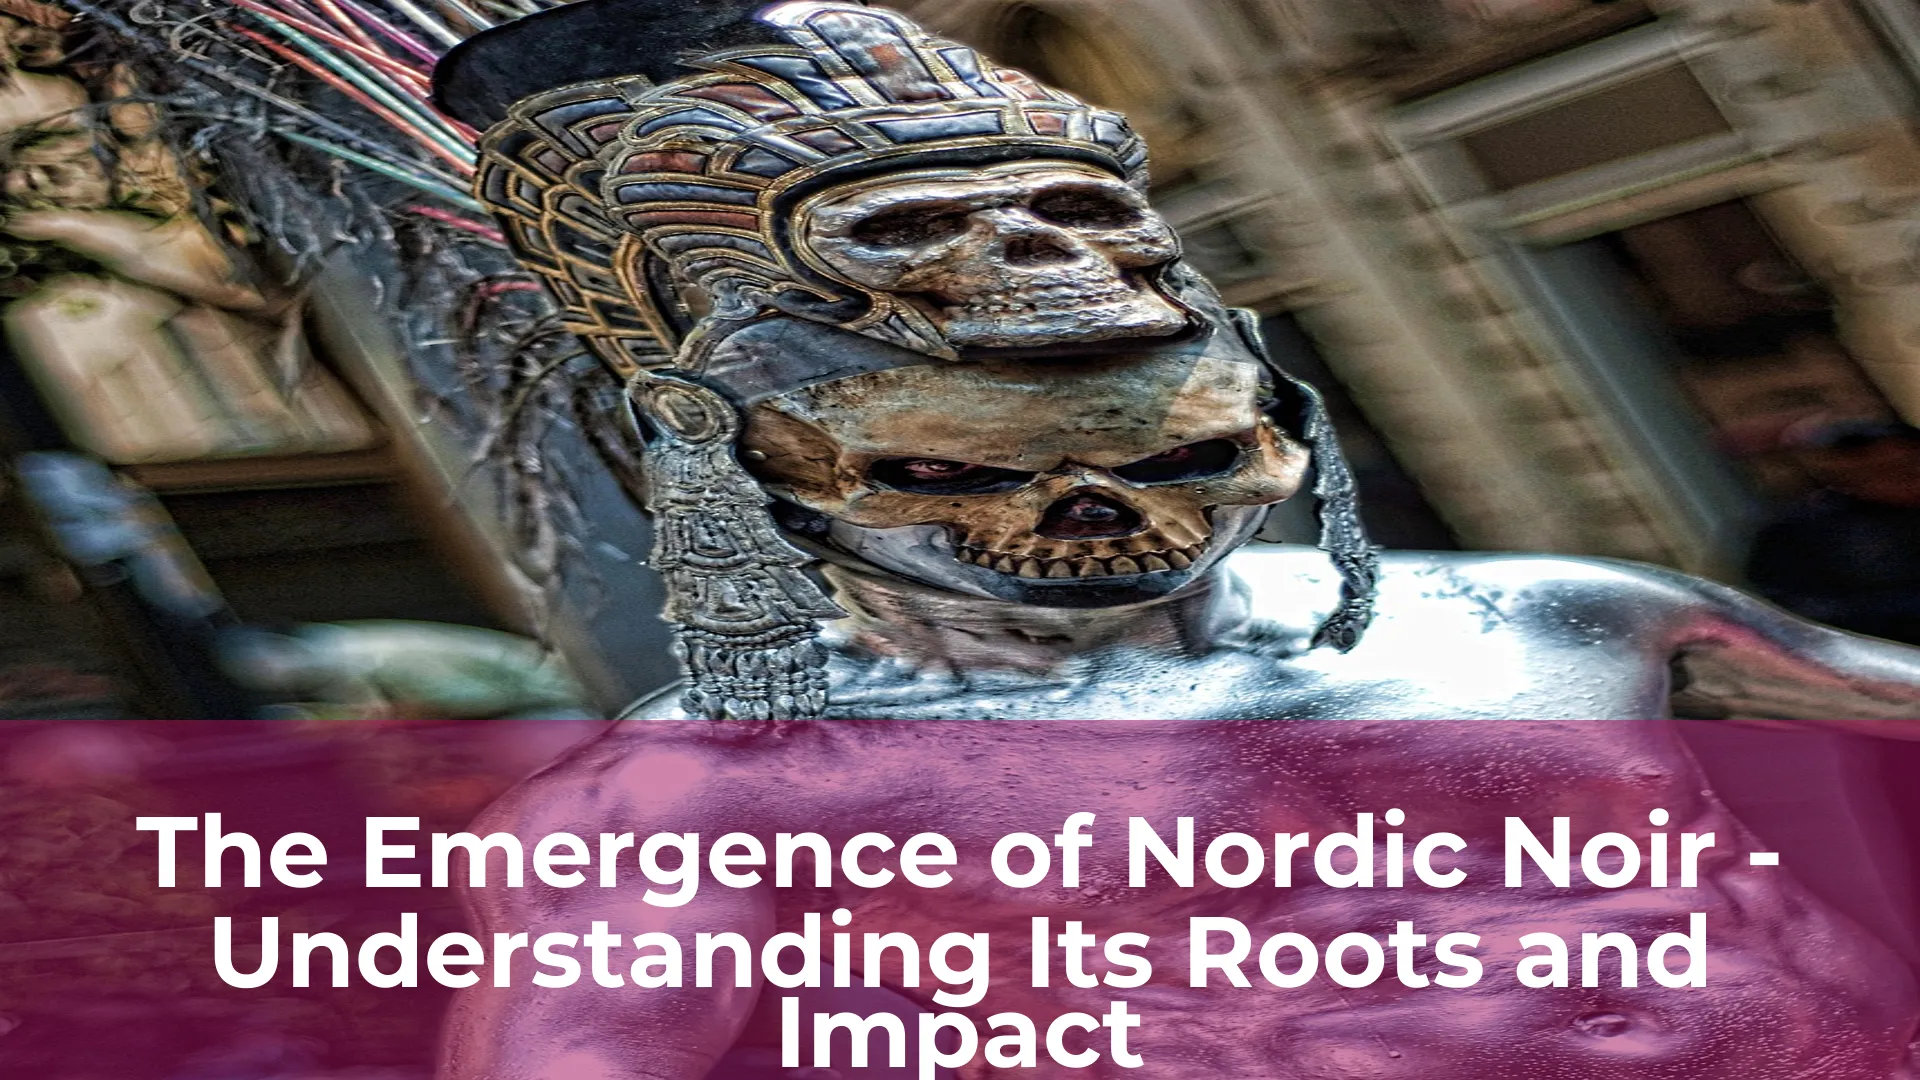 The emergence of nordic noir understanding its roots and impact